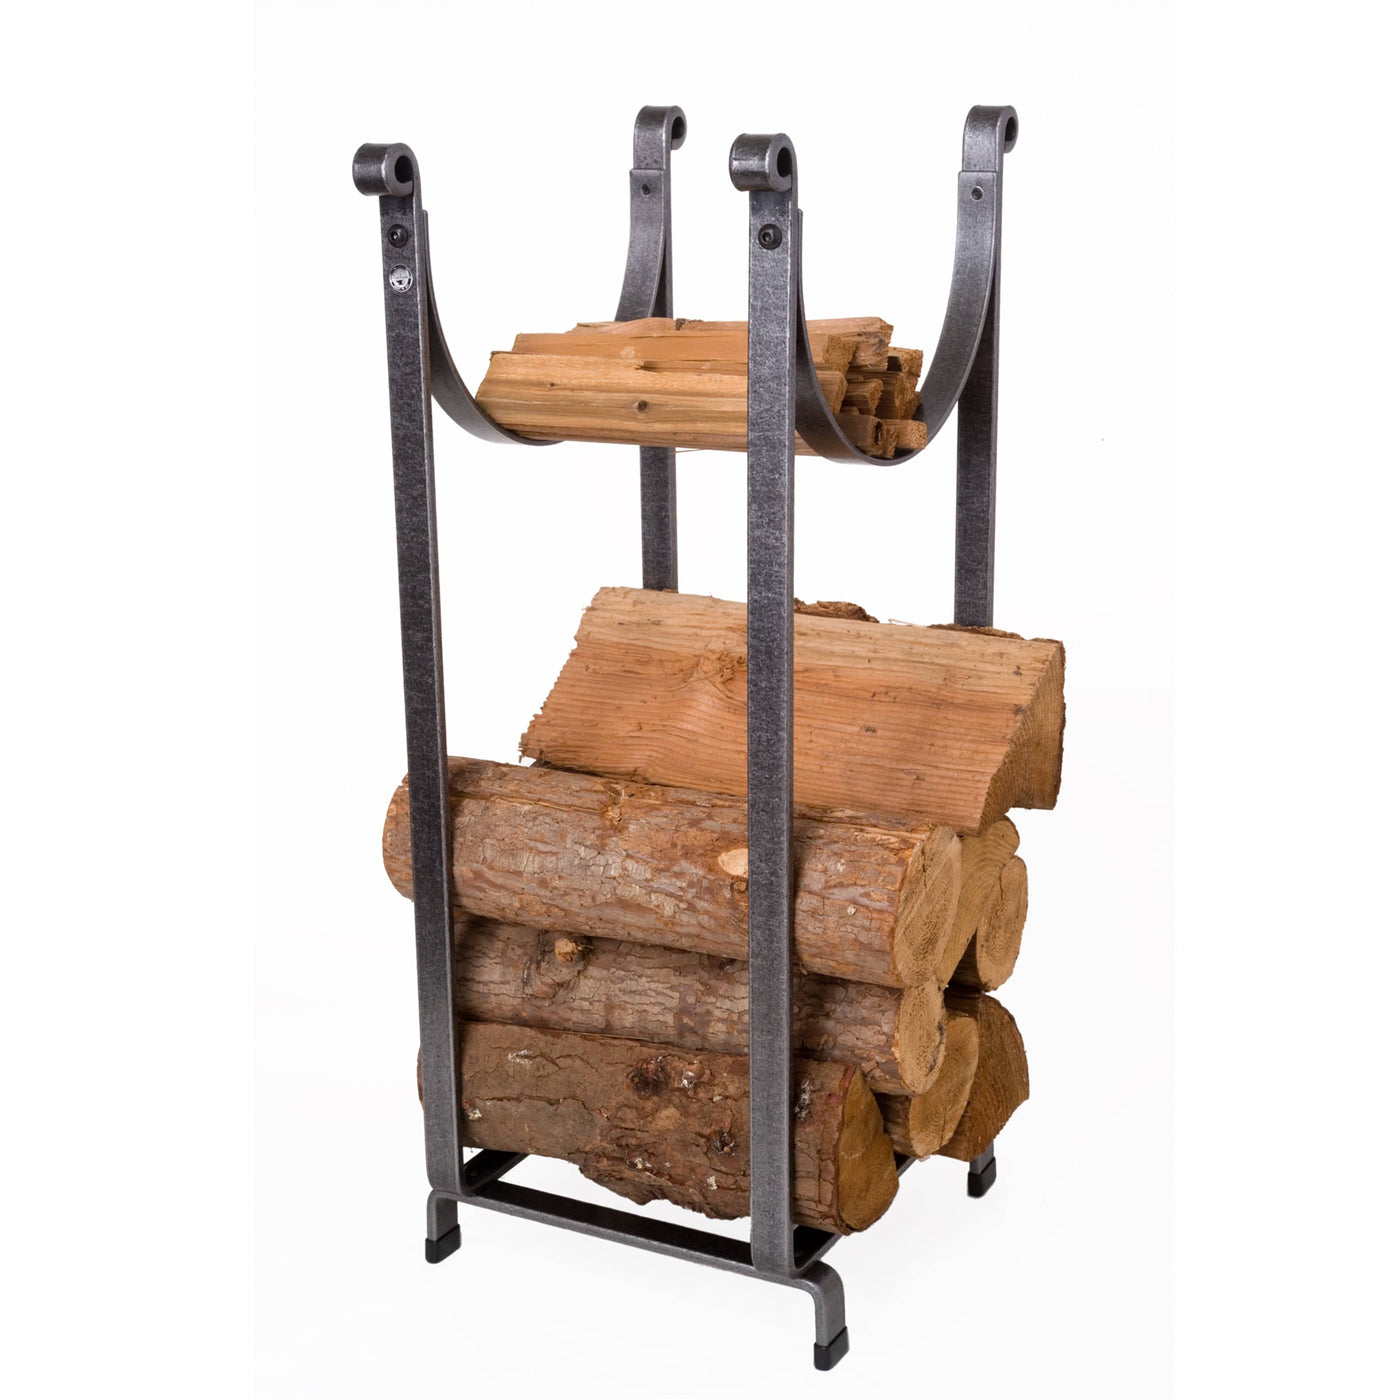 Handcrafted Sling Fireplace Log Rack w/Newspaper Holder and Tools